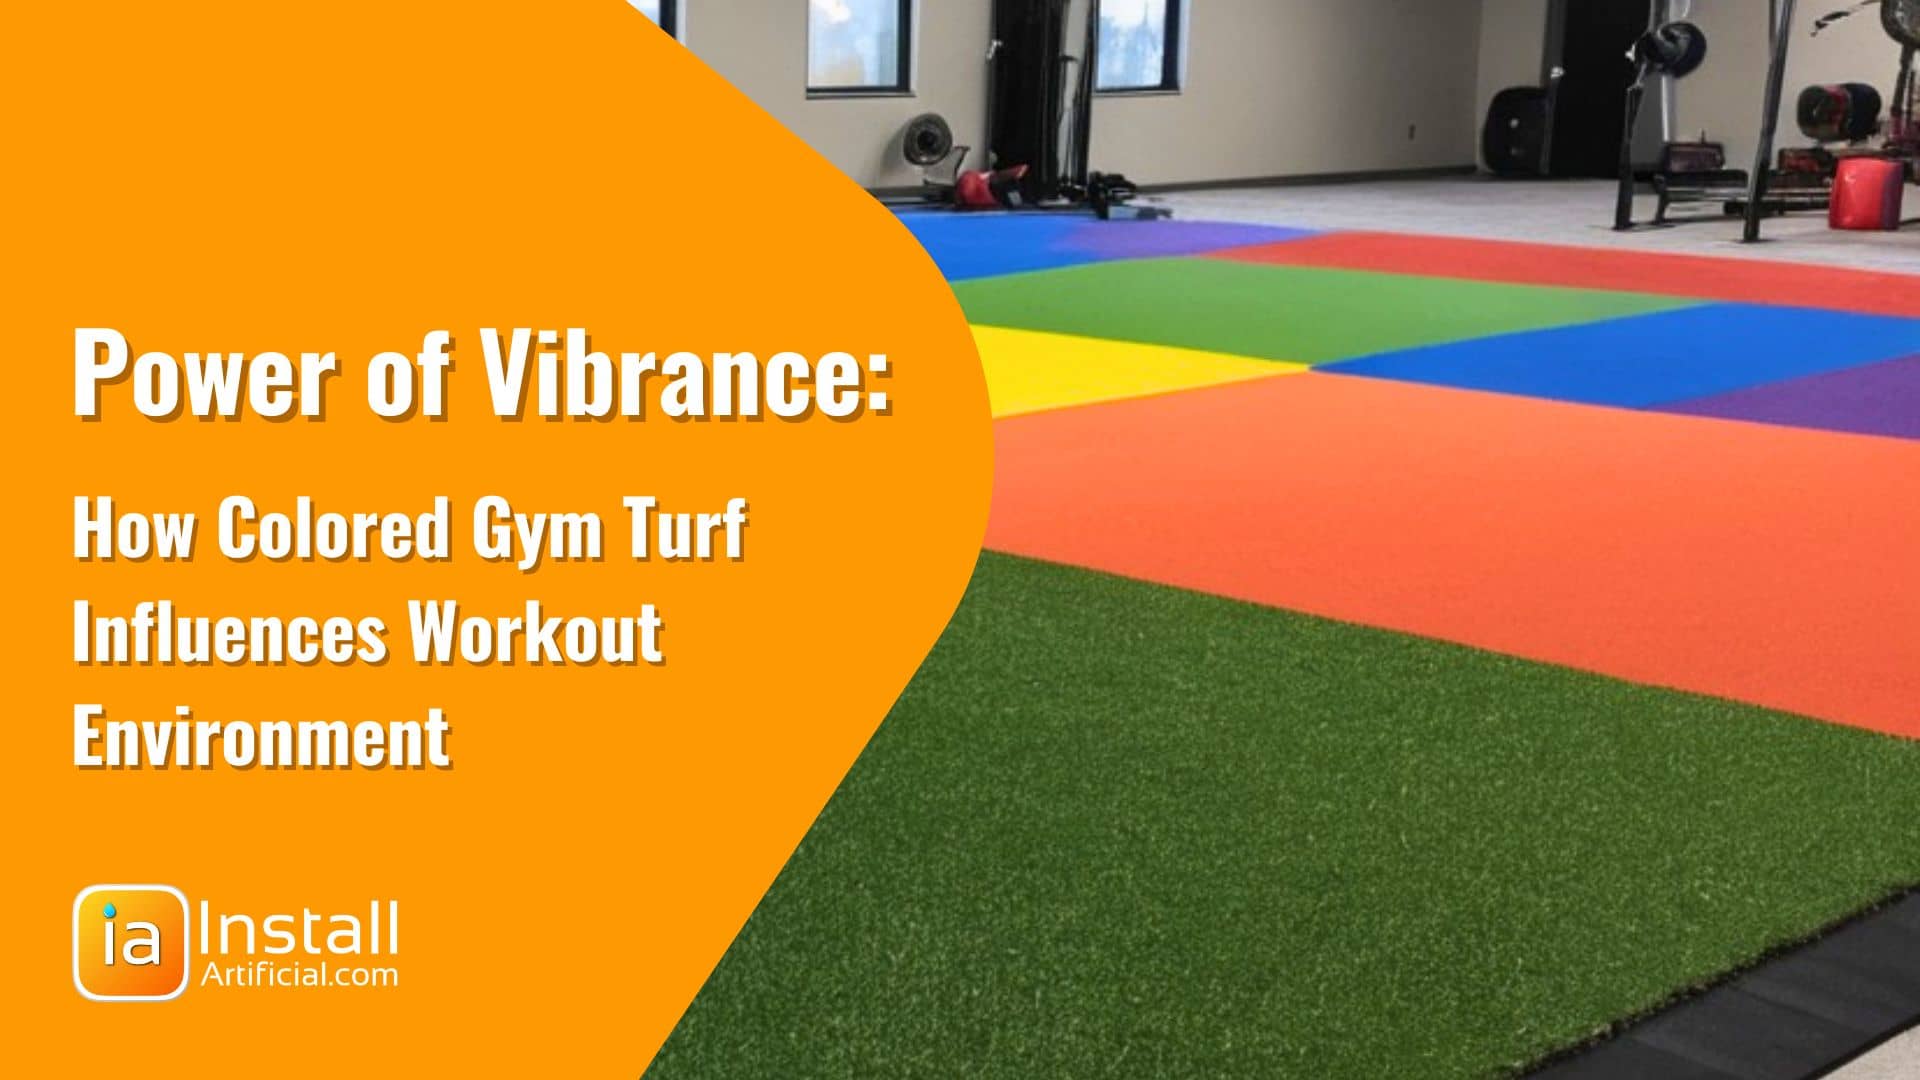 How colored gym turf influences workout environment